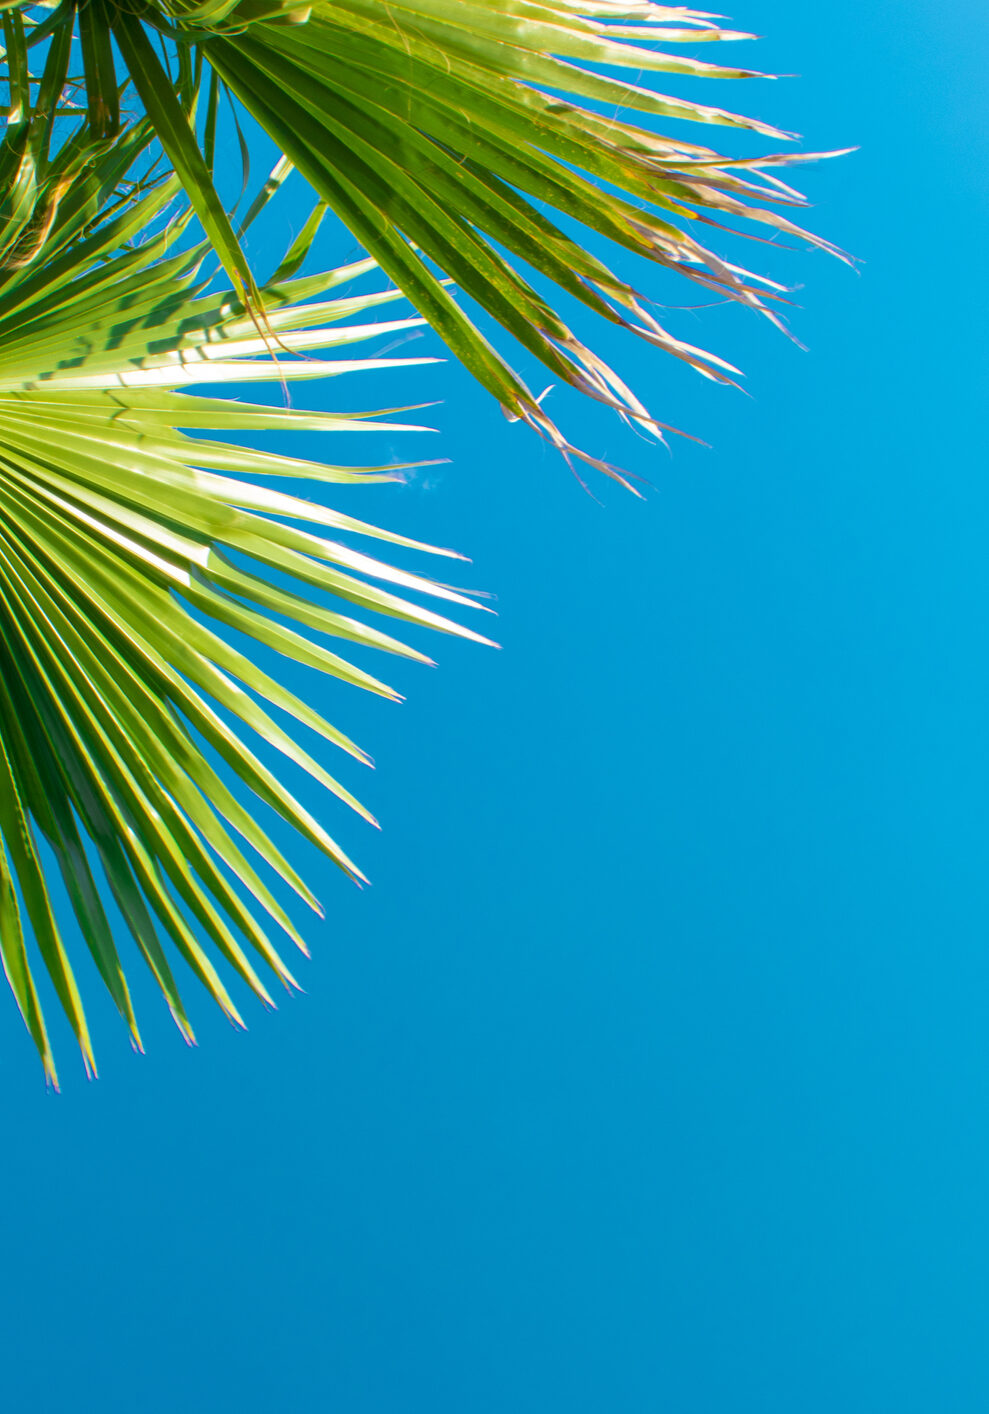 Close-Up Of Palm Tree Against Sky. Palm Tree, Tropical Background.